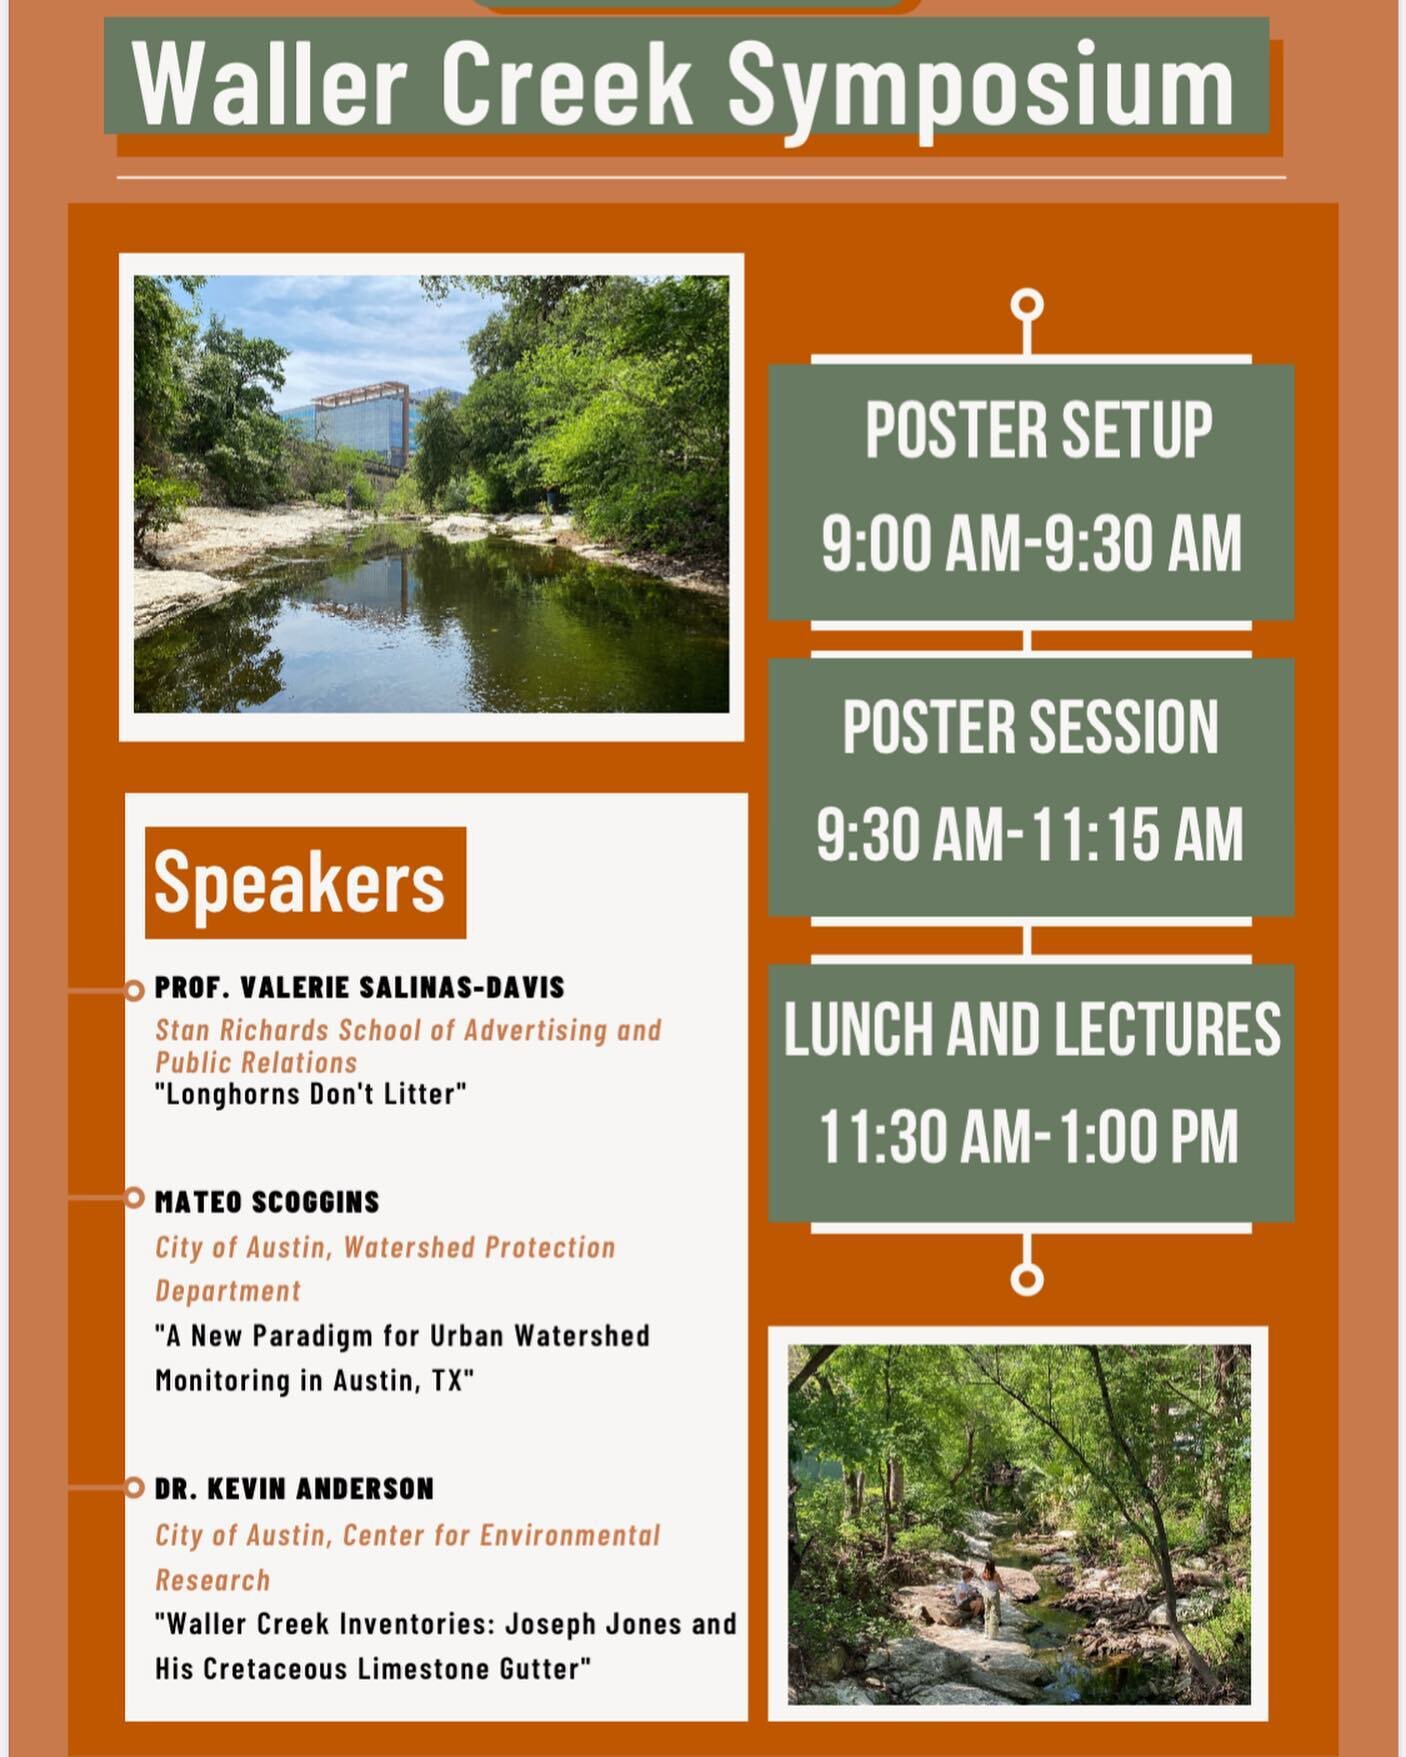 We know the semester gets a bit hectic toward the end, but don&rsquo;t forget to stop by the Waller Creek Symposium today if you&rsquo;re registered!